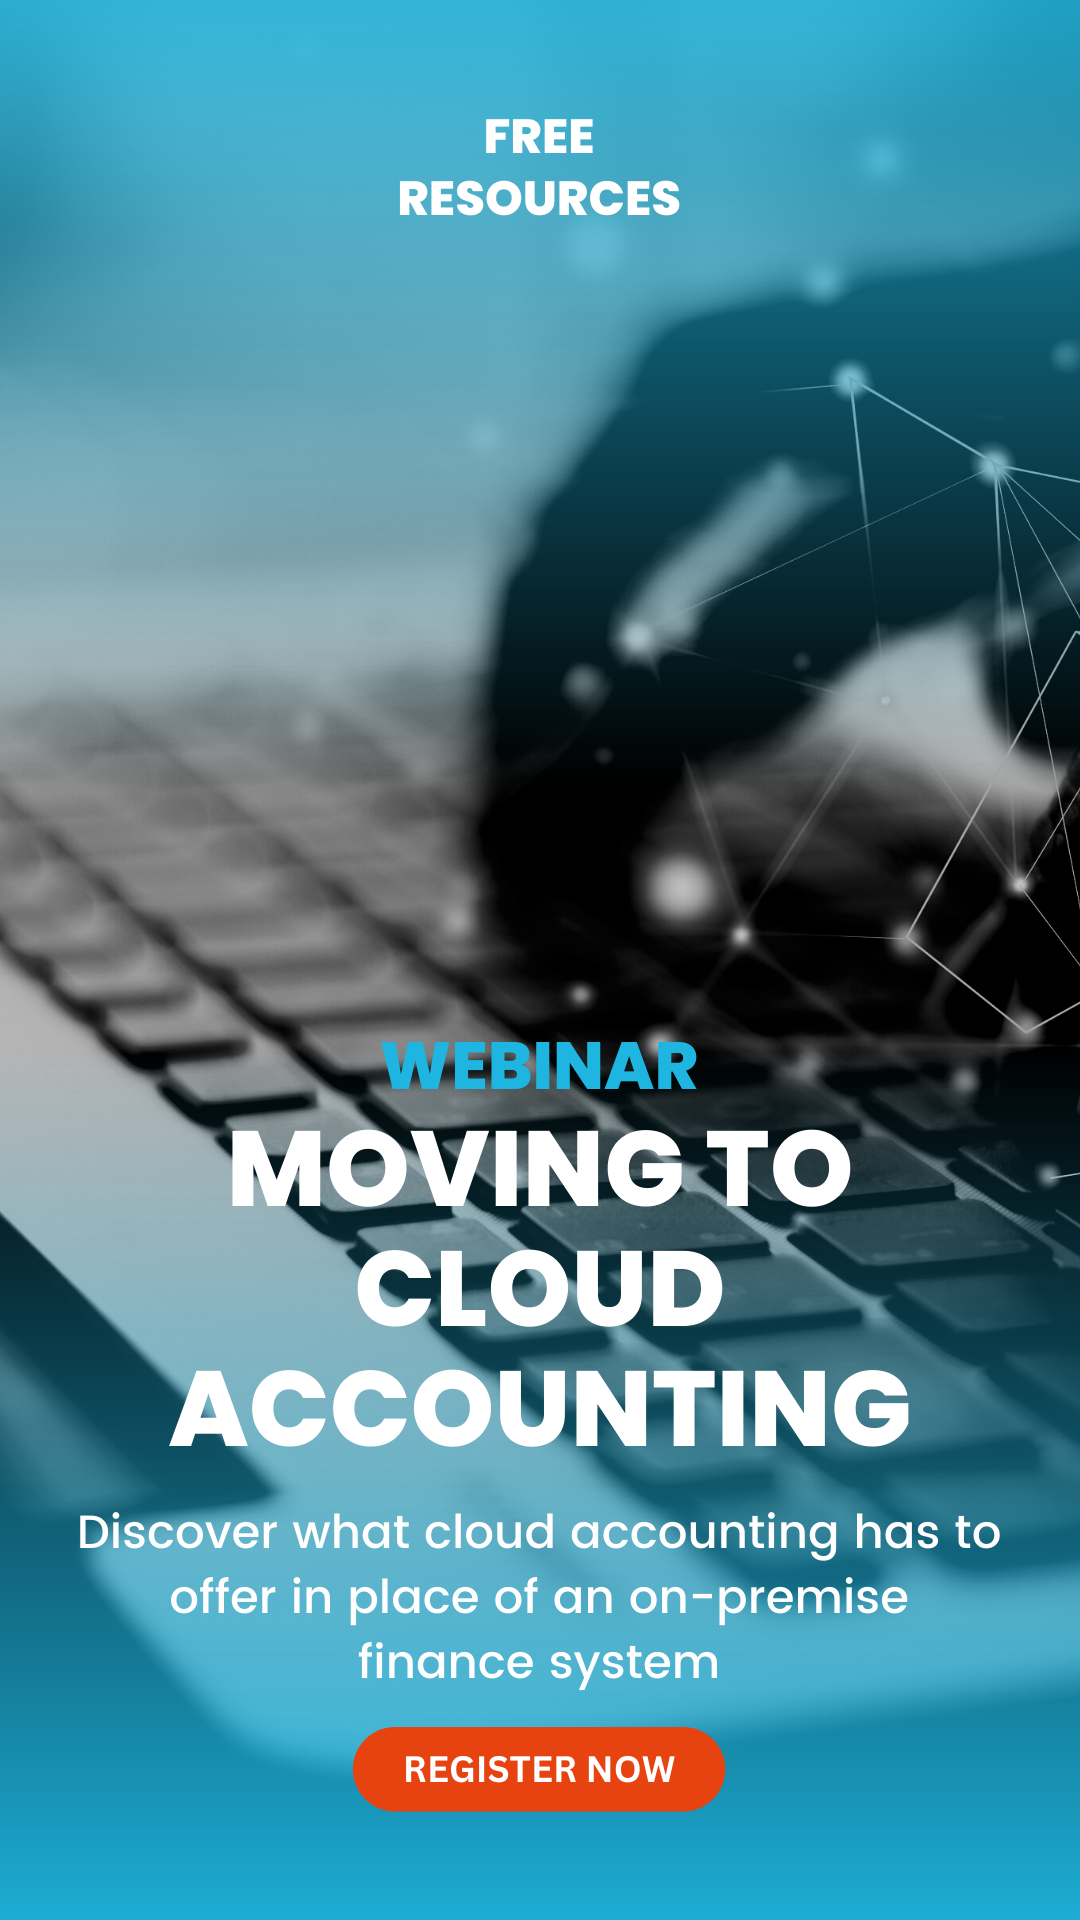 Click to register for the Moving to Cloud Accounting webinar